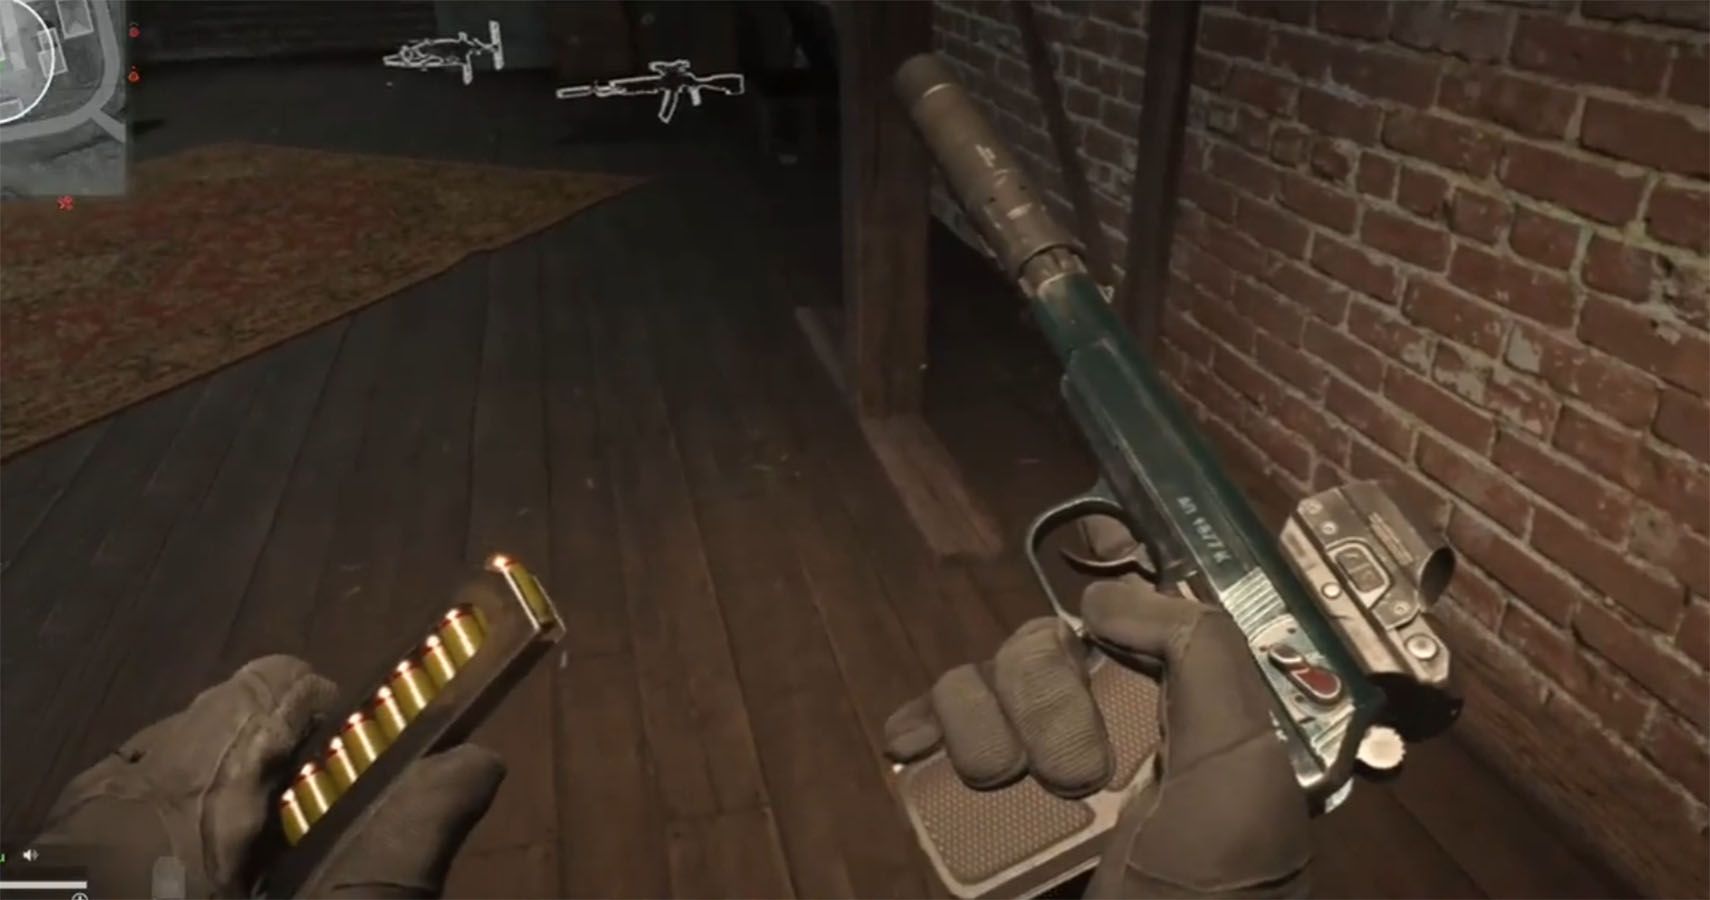 Screenshot of a video shared by Redditor u/RestlessGoats showing a fully automatic, suppressed, Sykov pistol being reloaded.